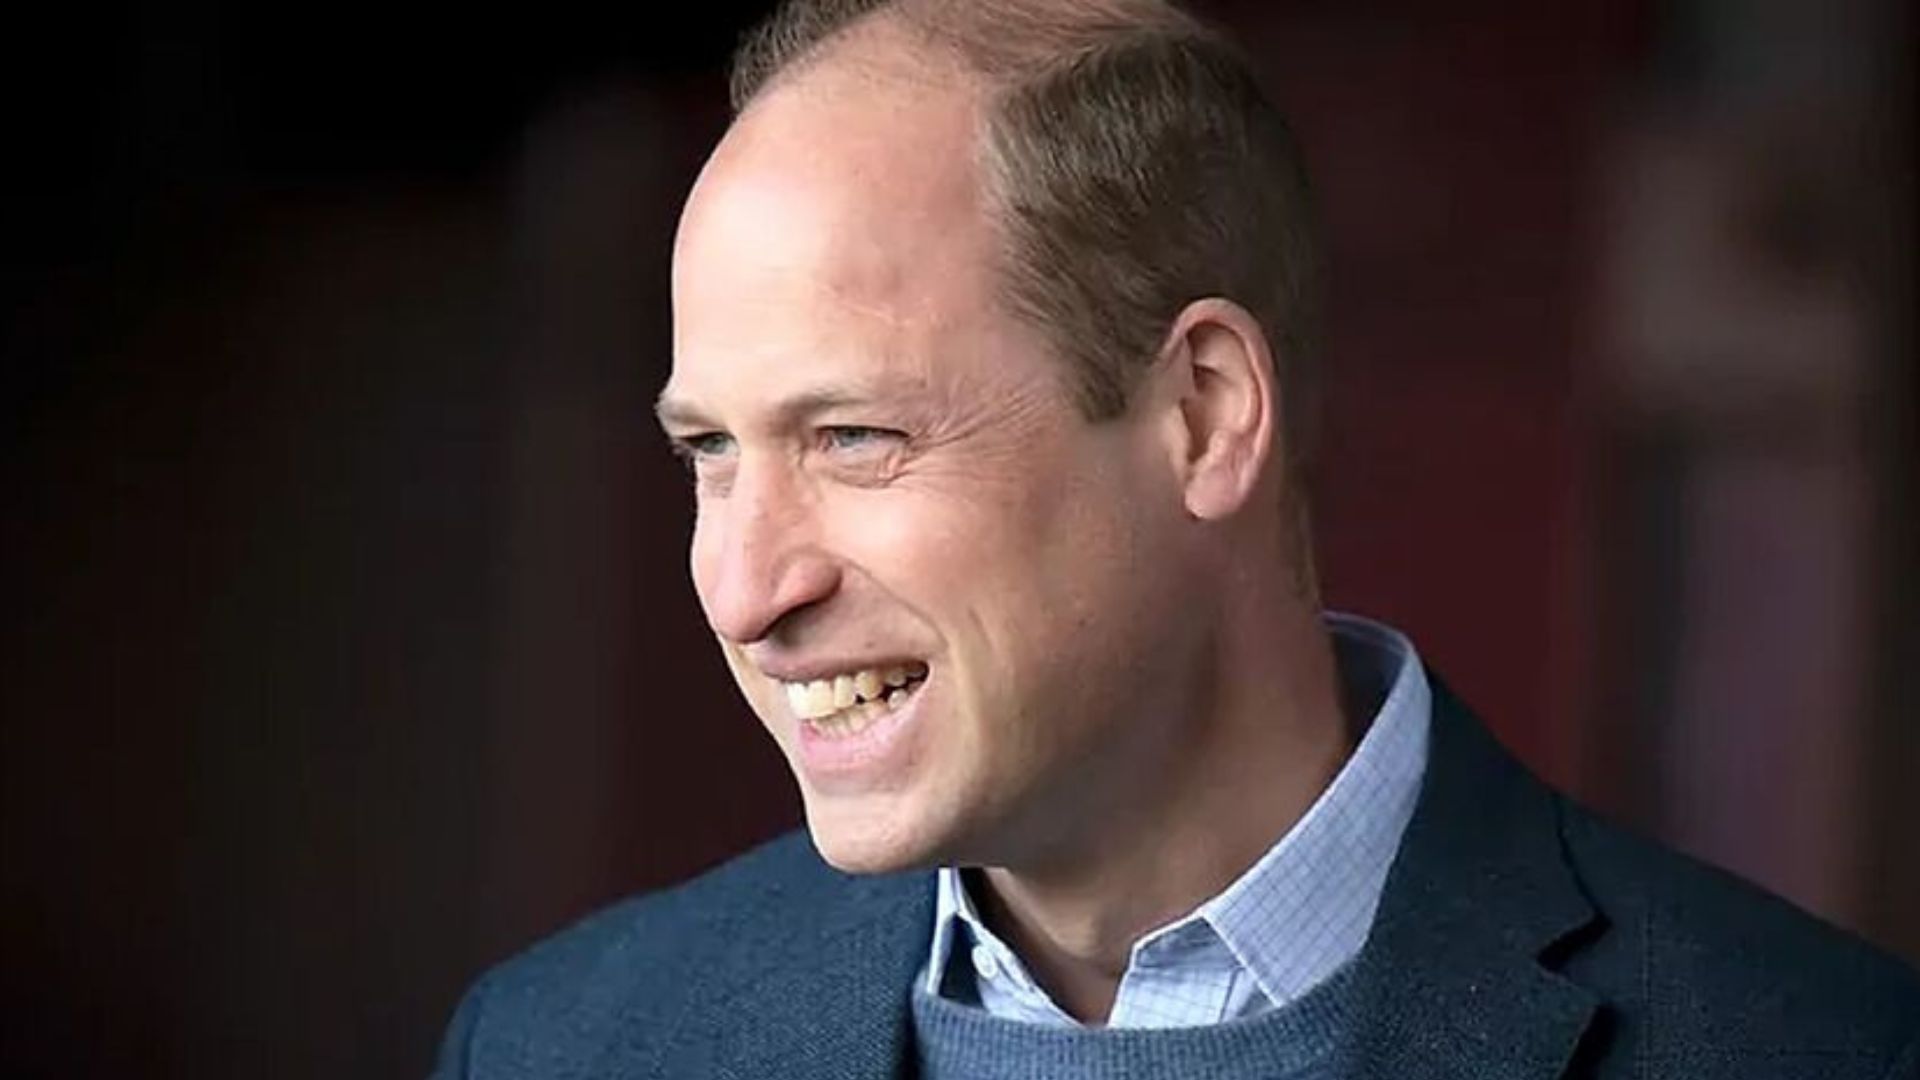 Prince William Smiling And Wearing Black Suit